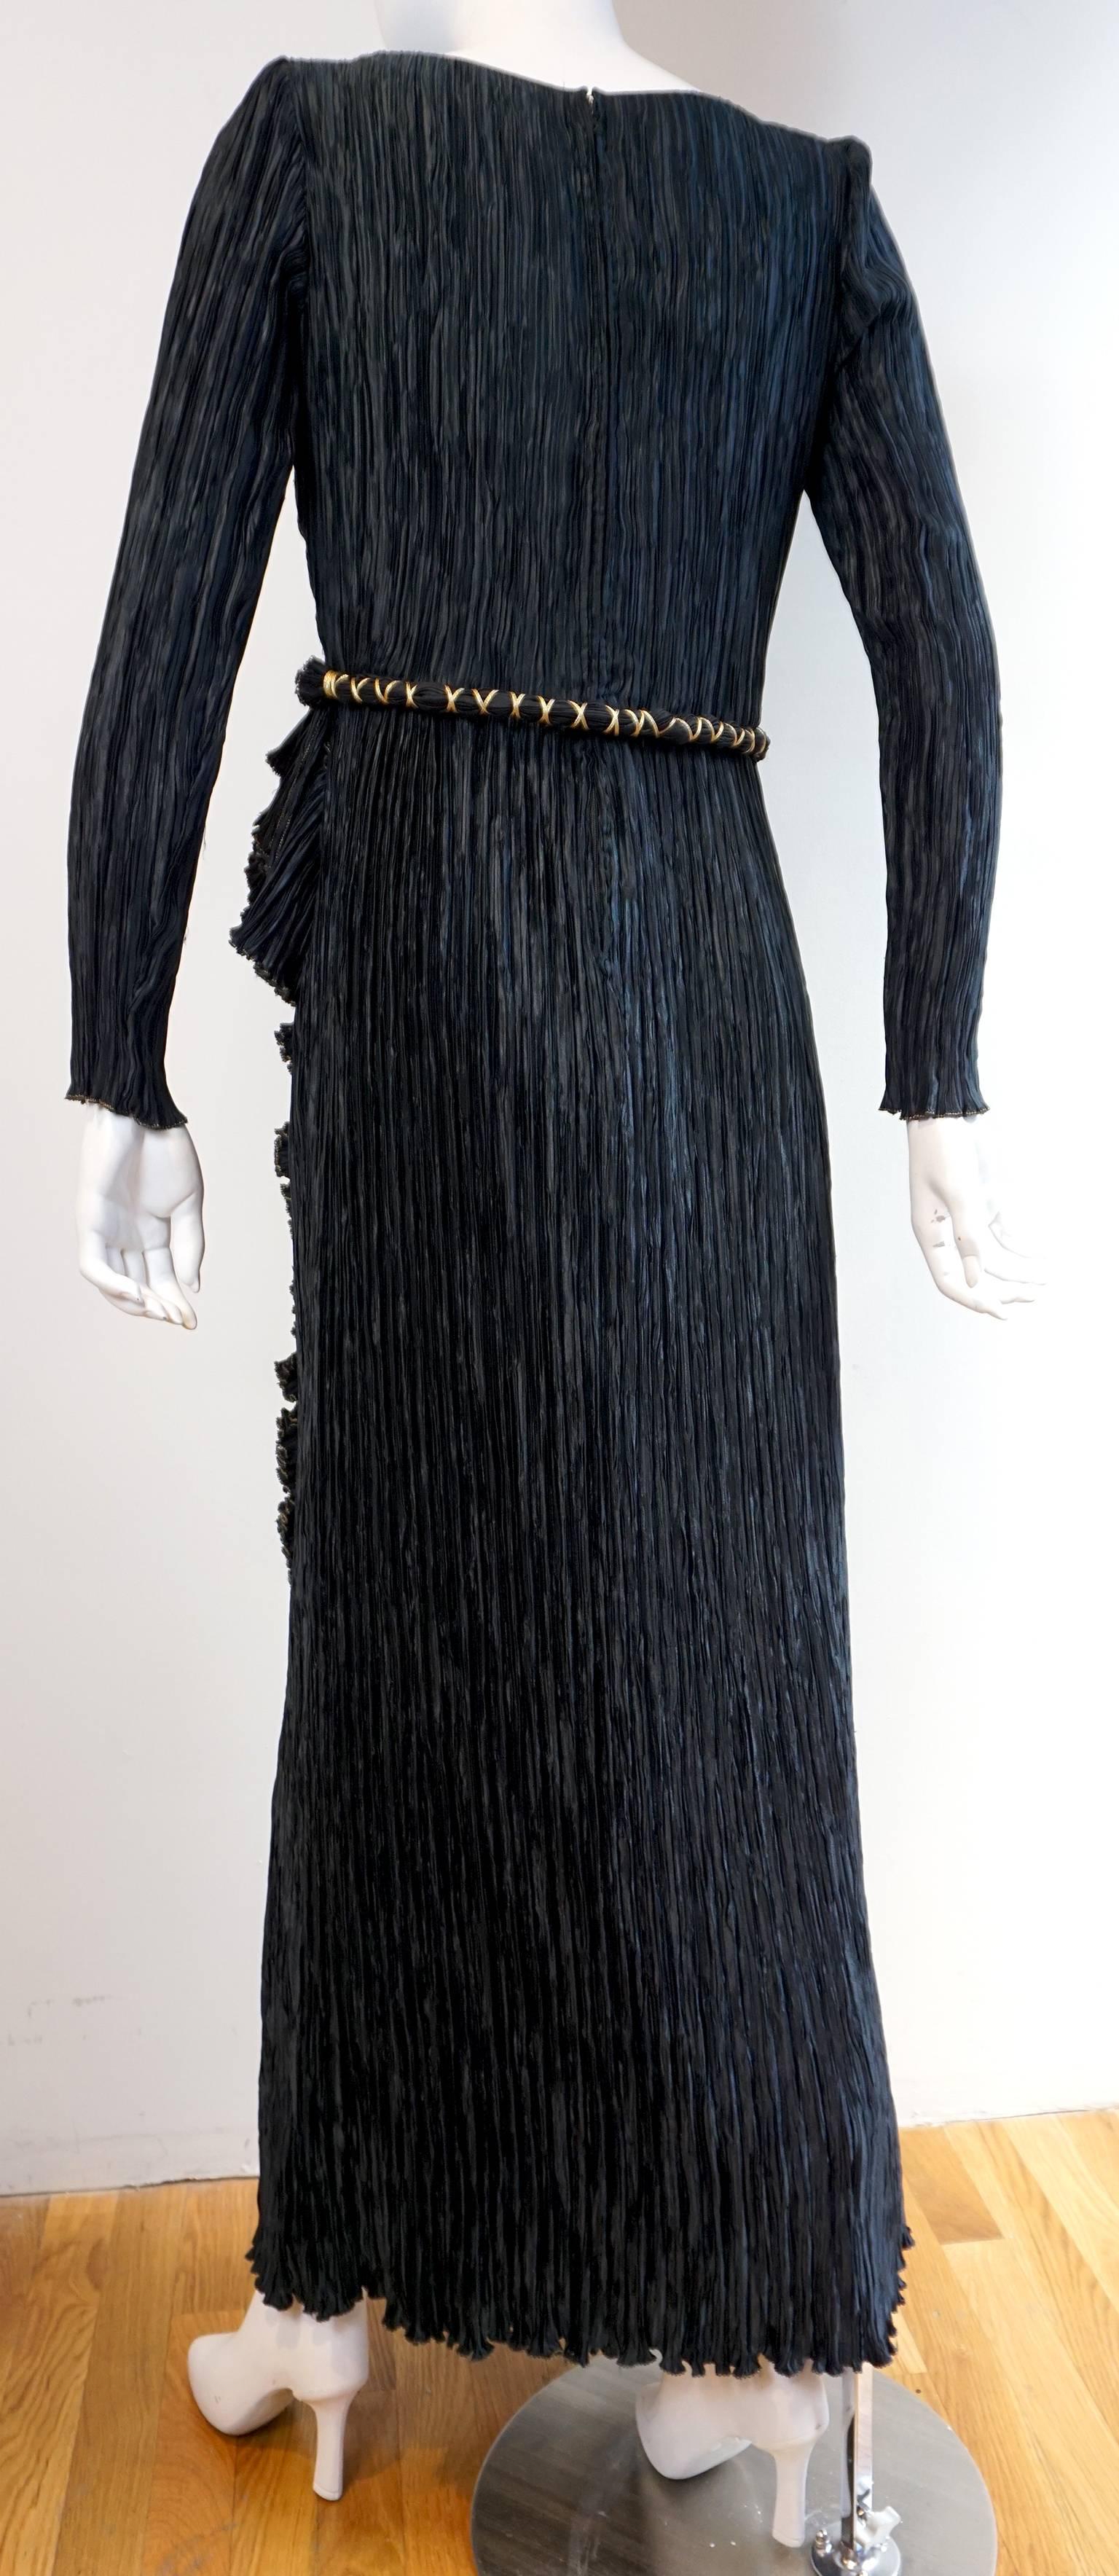 MARY MCFADDEN Black & Gold Pleated Ruffle Gown 1